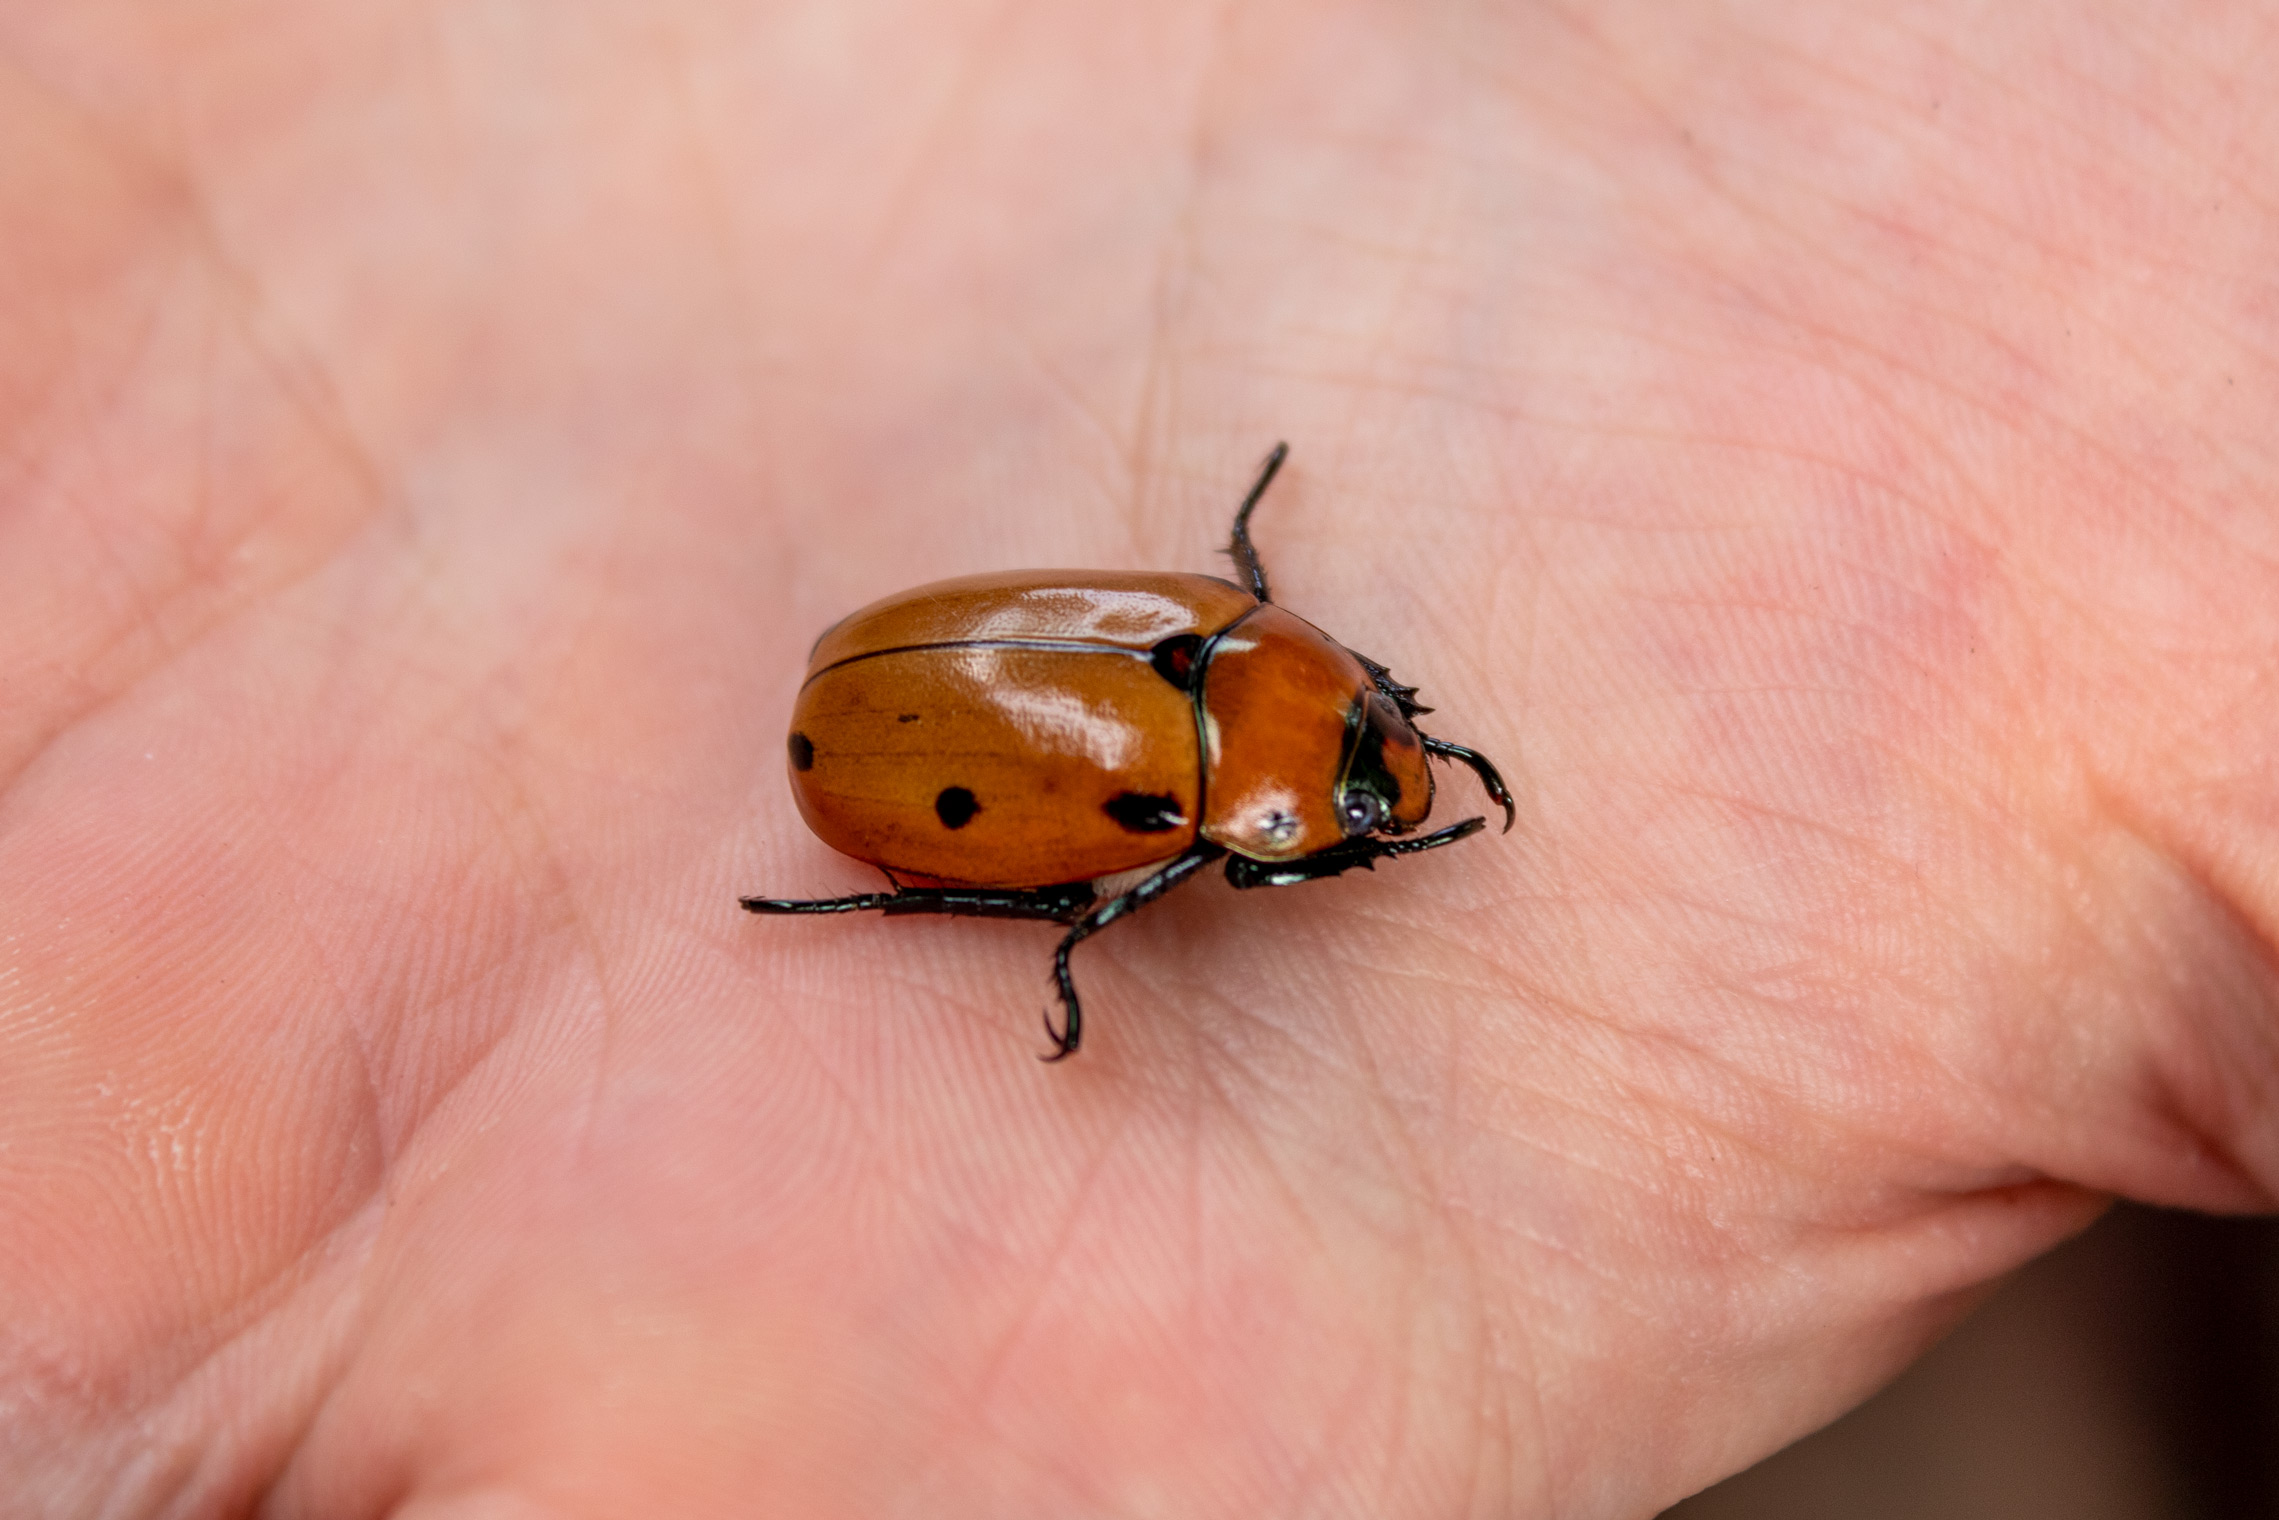 Large orange beetle with black spots sitting on an open hand